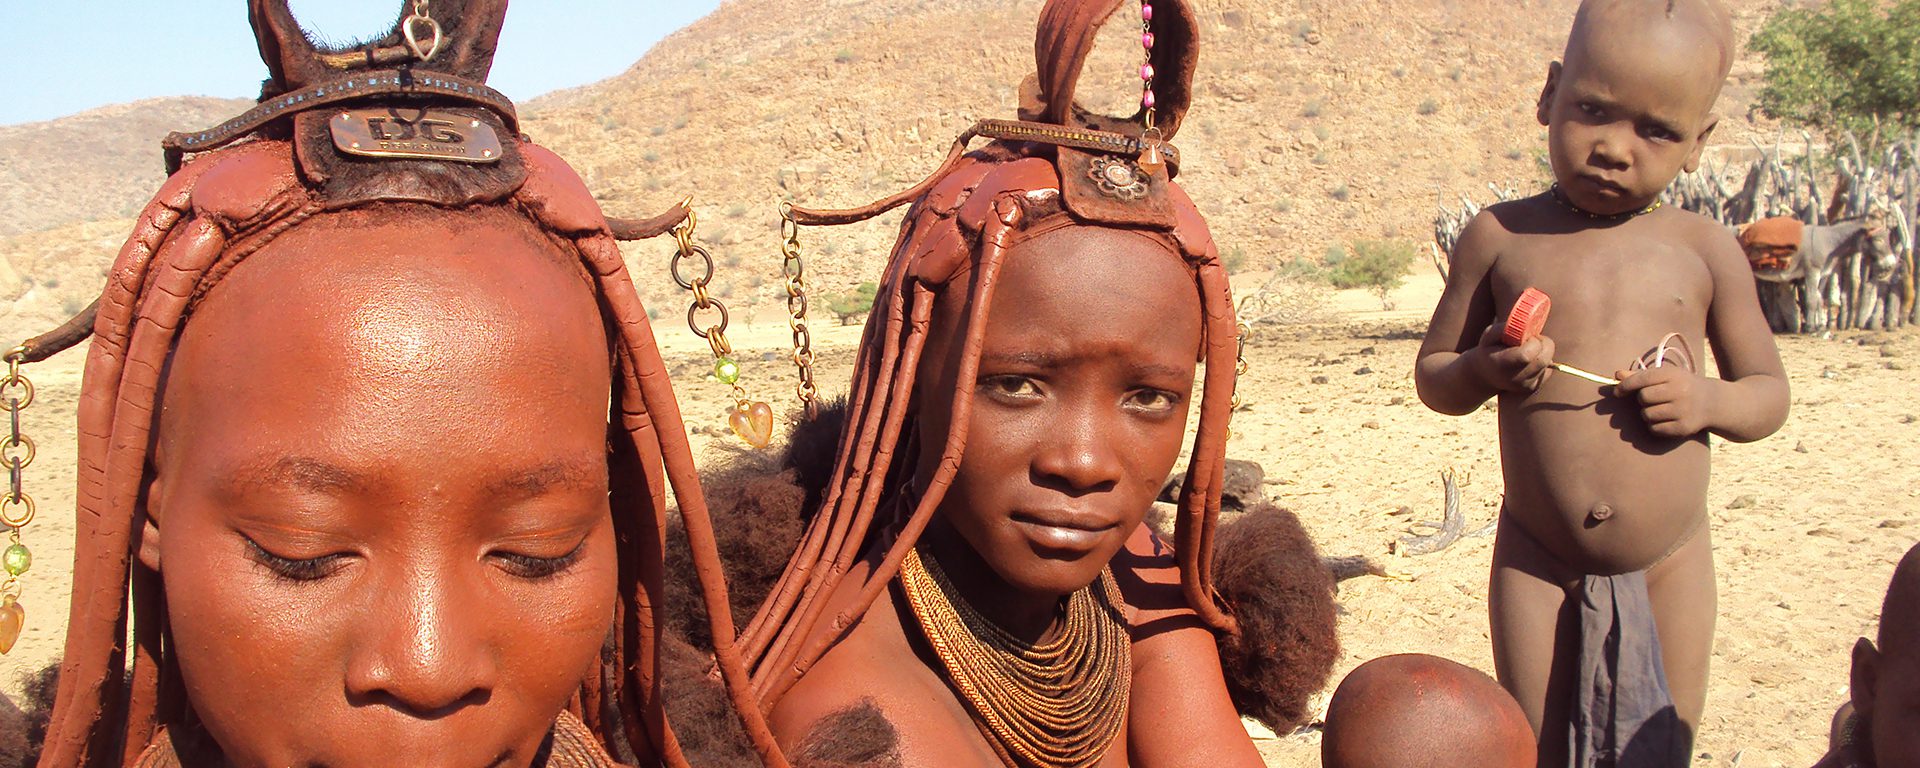 encounter-with-a-himba-tribe-14